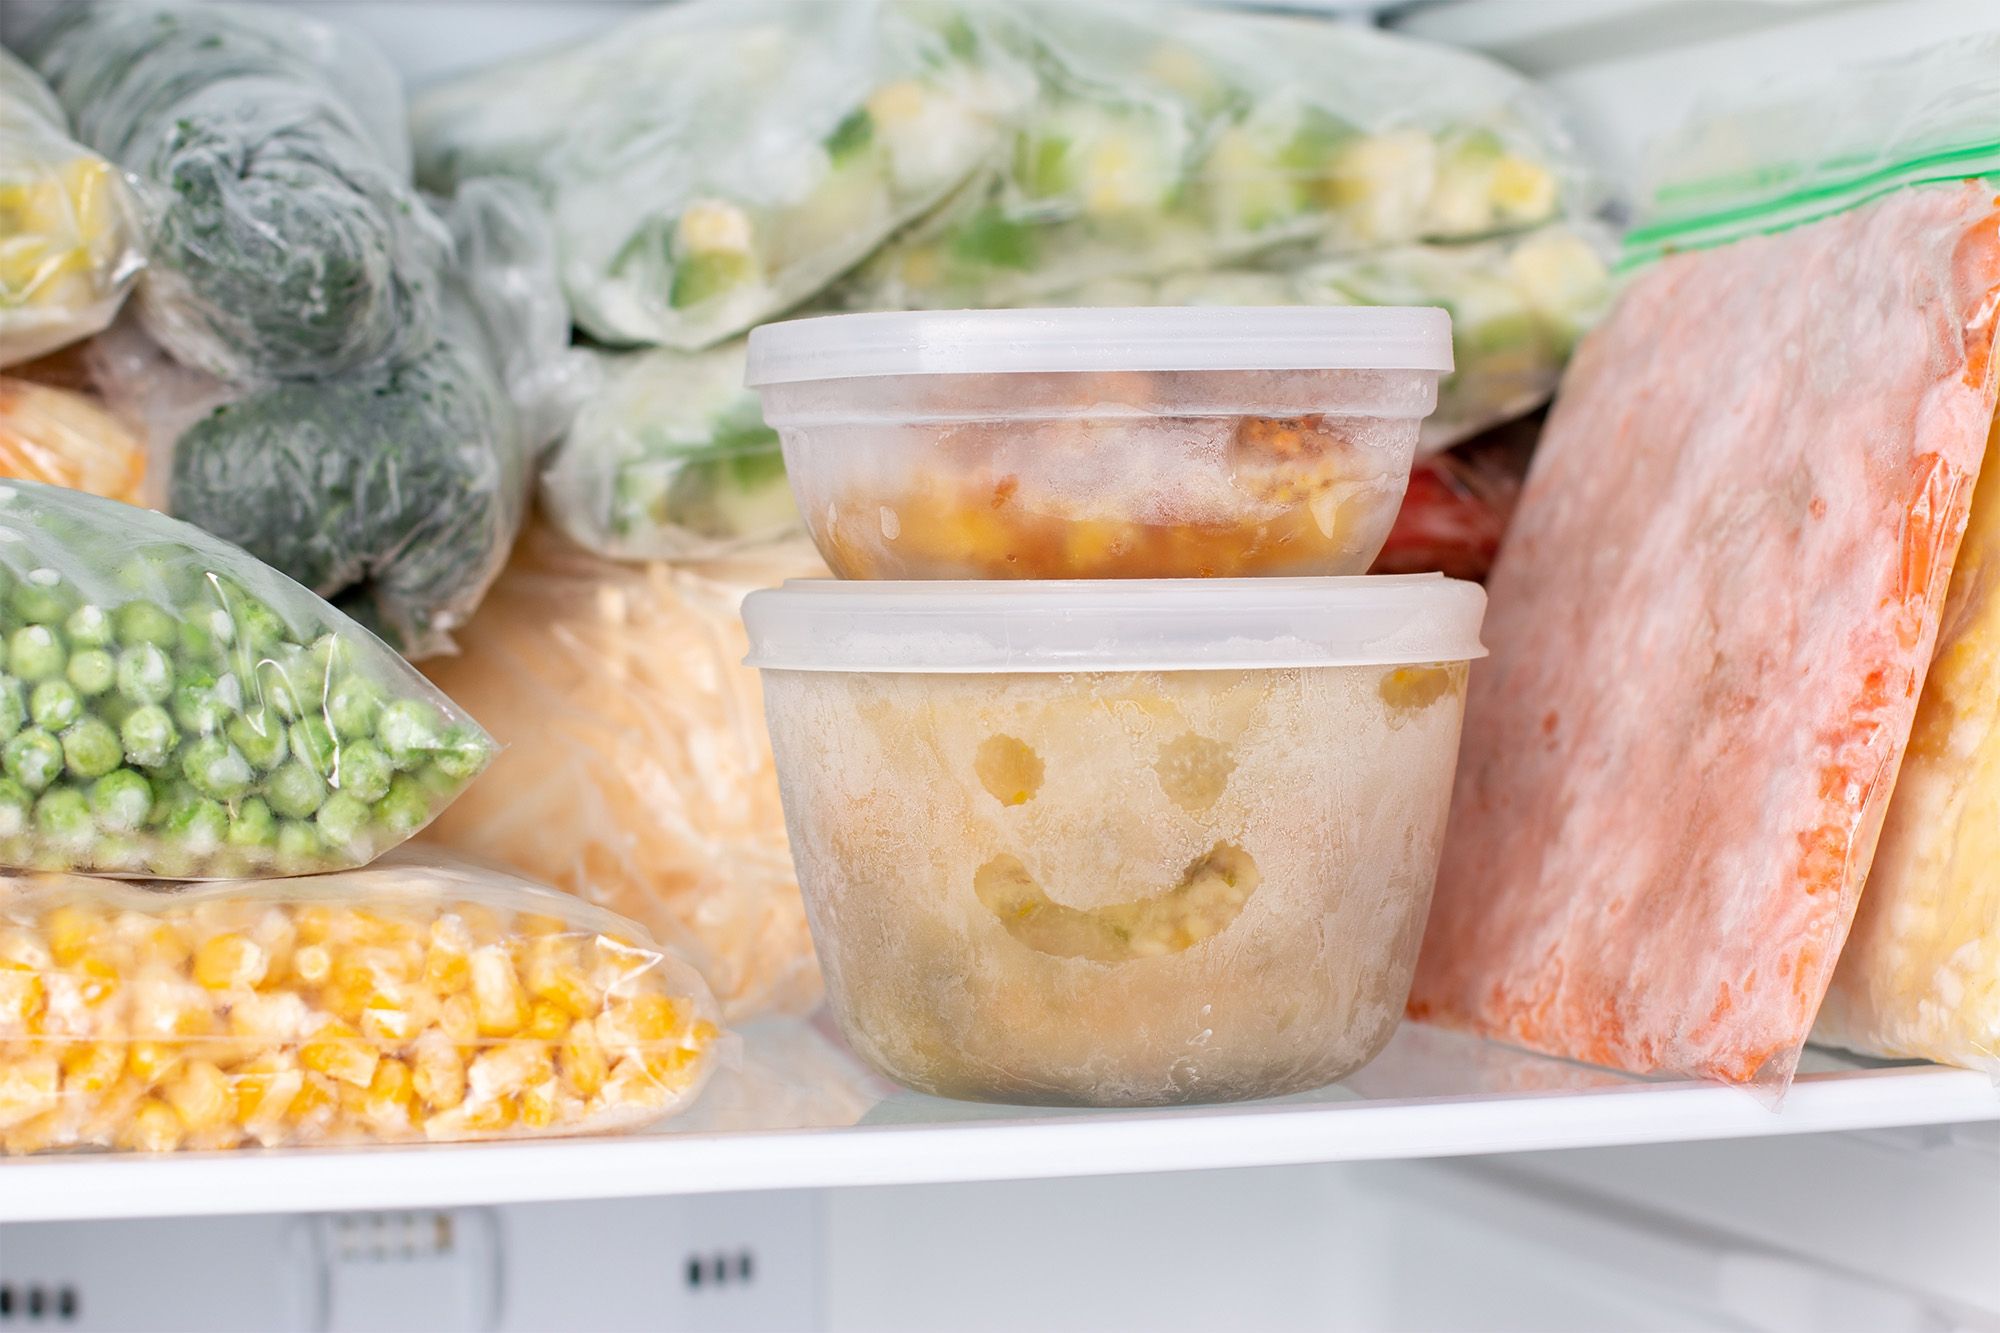 Frozen Food Storage Guide: How Long Can You Freeze Foods For?